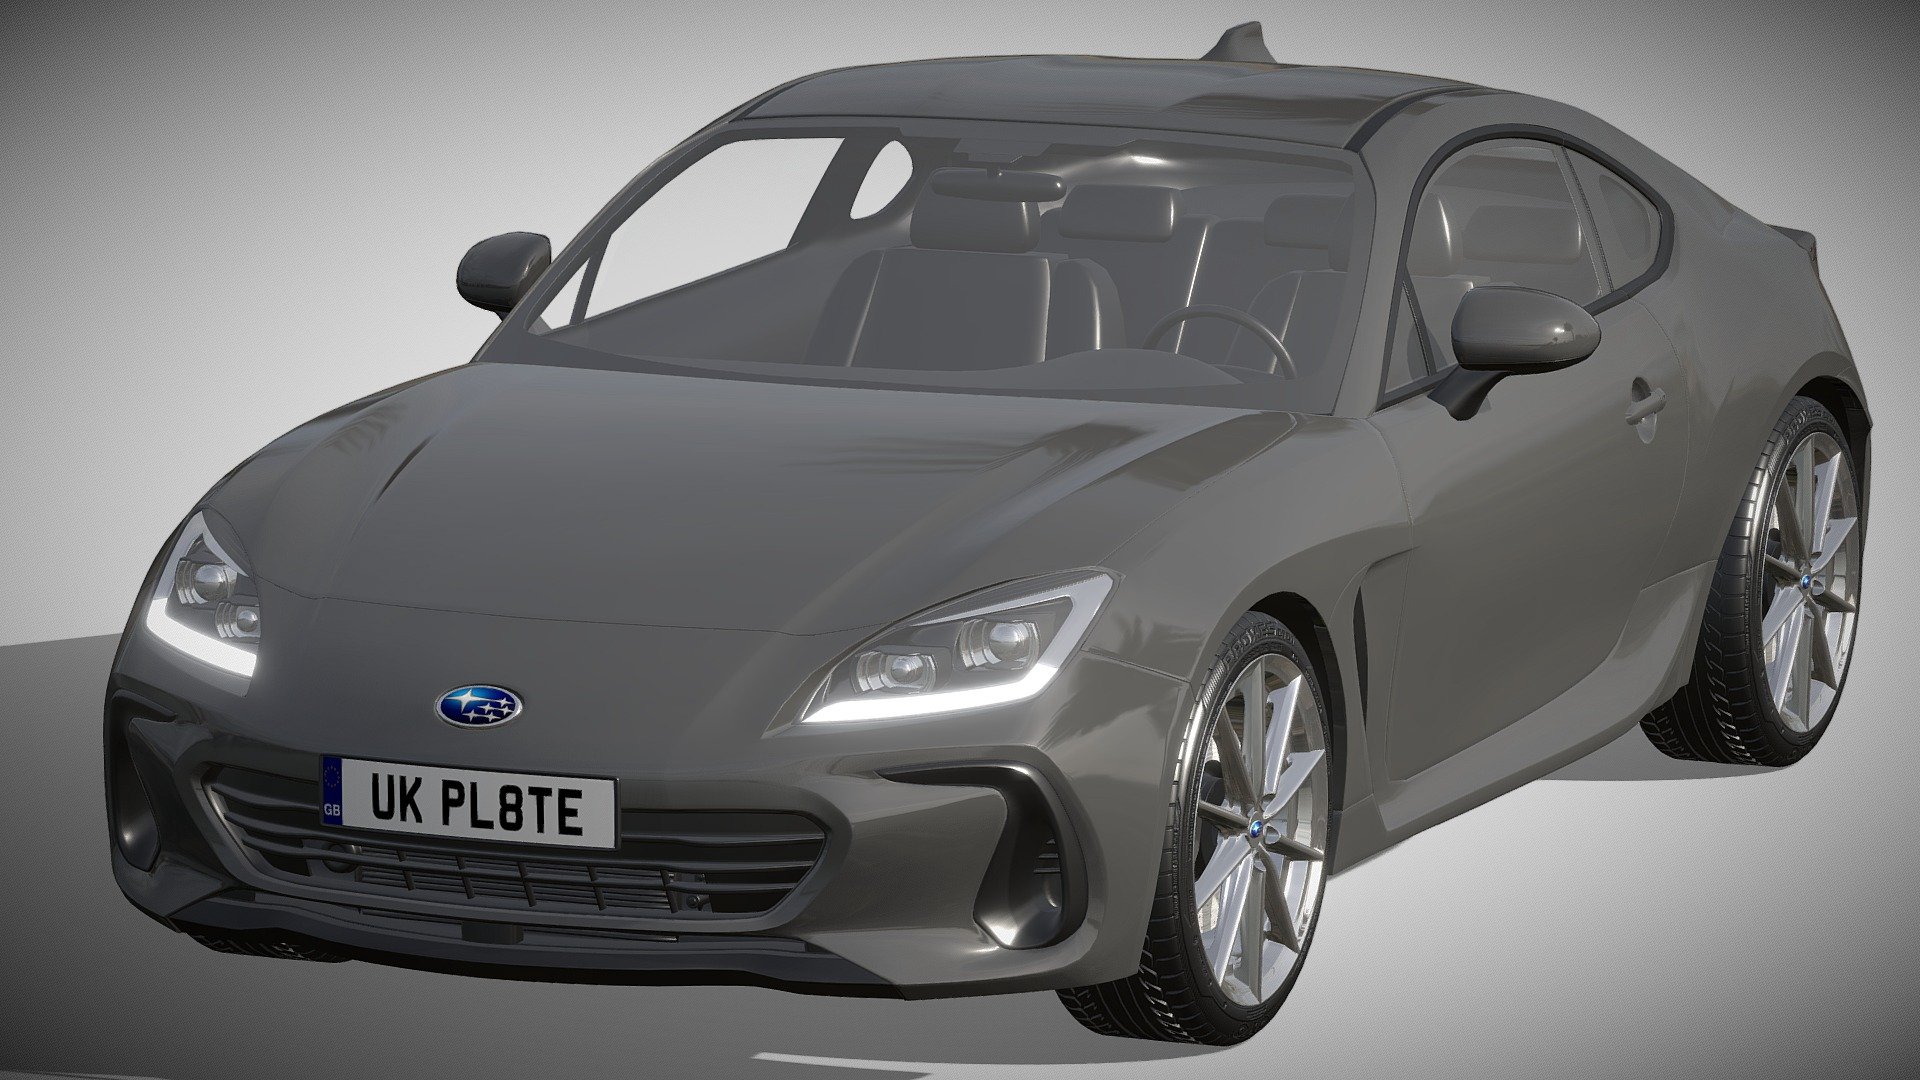 Subaru BRZ 2022

https://www.subaru.com/2022-brz

Clean geometry Light weight model, yet completely detailed for HI-Res renders. Use for movies, Advertisements or games

Corona render and materials

All textures include in *.rar files

Lighting setup is not included in the file! - Subaru BRZ 2022 - Buy Royalty Free 3D model by zifir3d 3d model